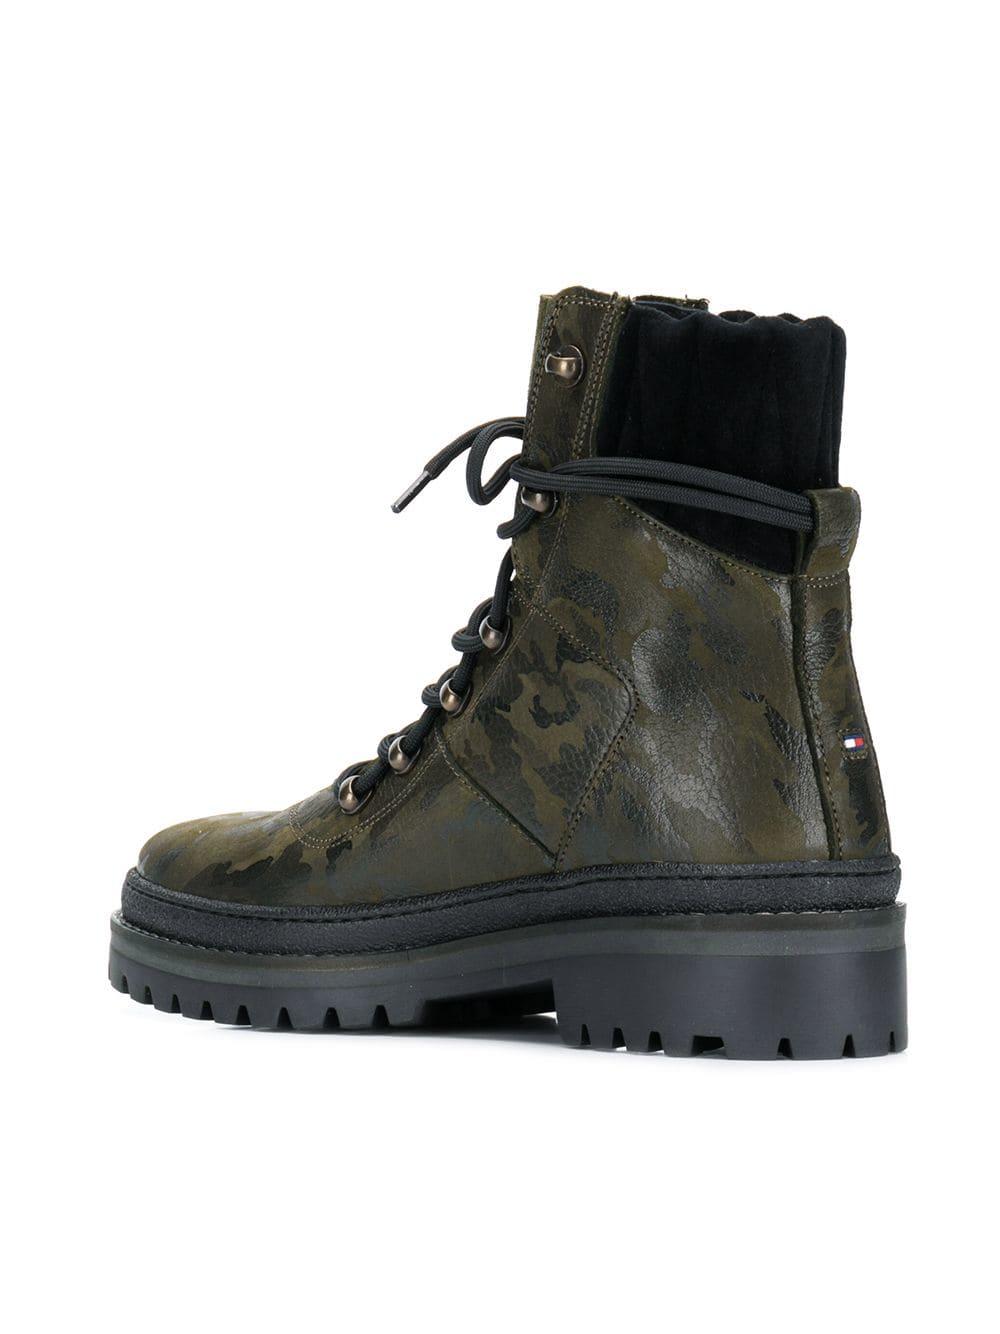 Tommy Jeans Hiking Boots on Sale, SAVE 37% - aveclumiere.com